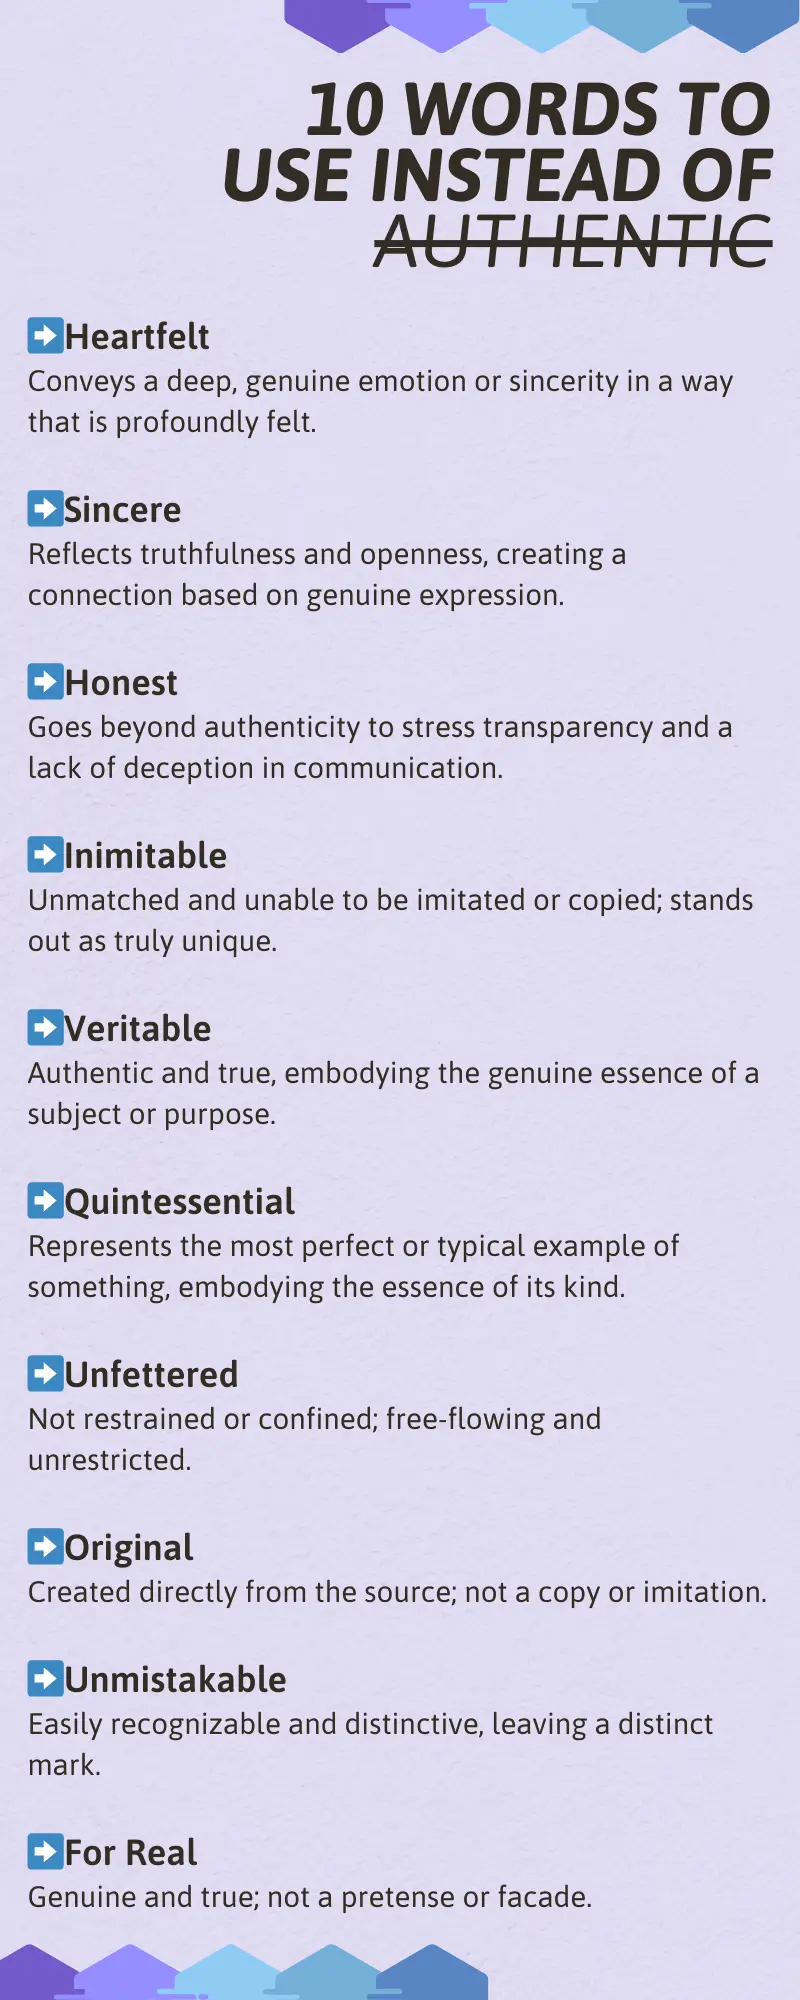 10 words to use instead of authentic: alternatives list that lists synonyms for Authentic and describes their nuanced meaning